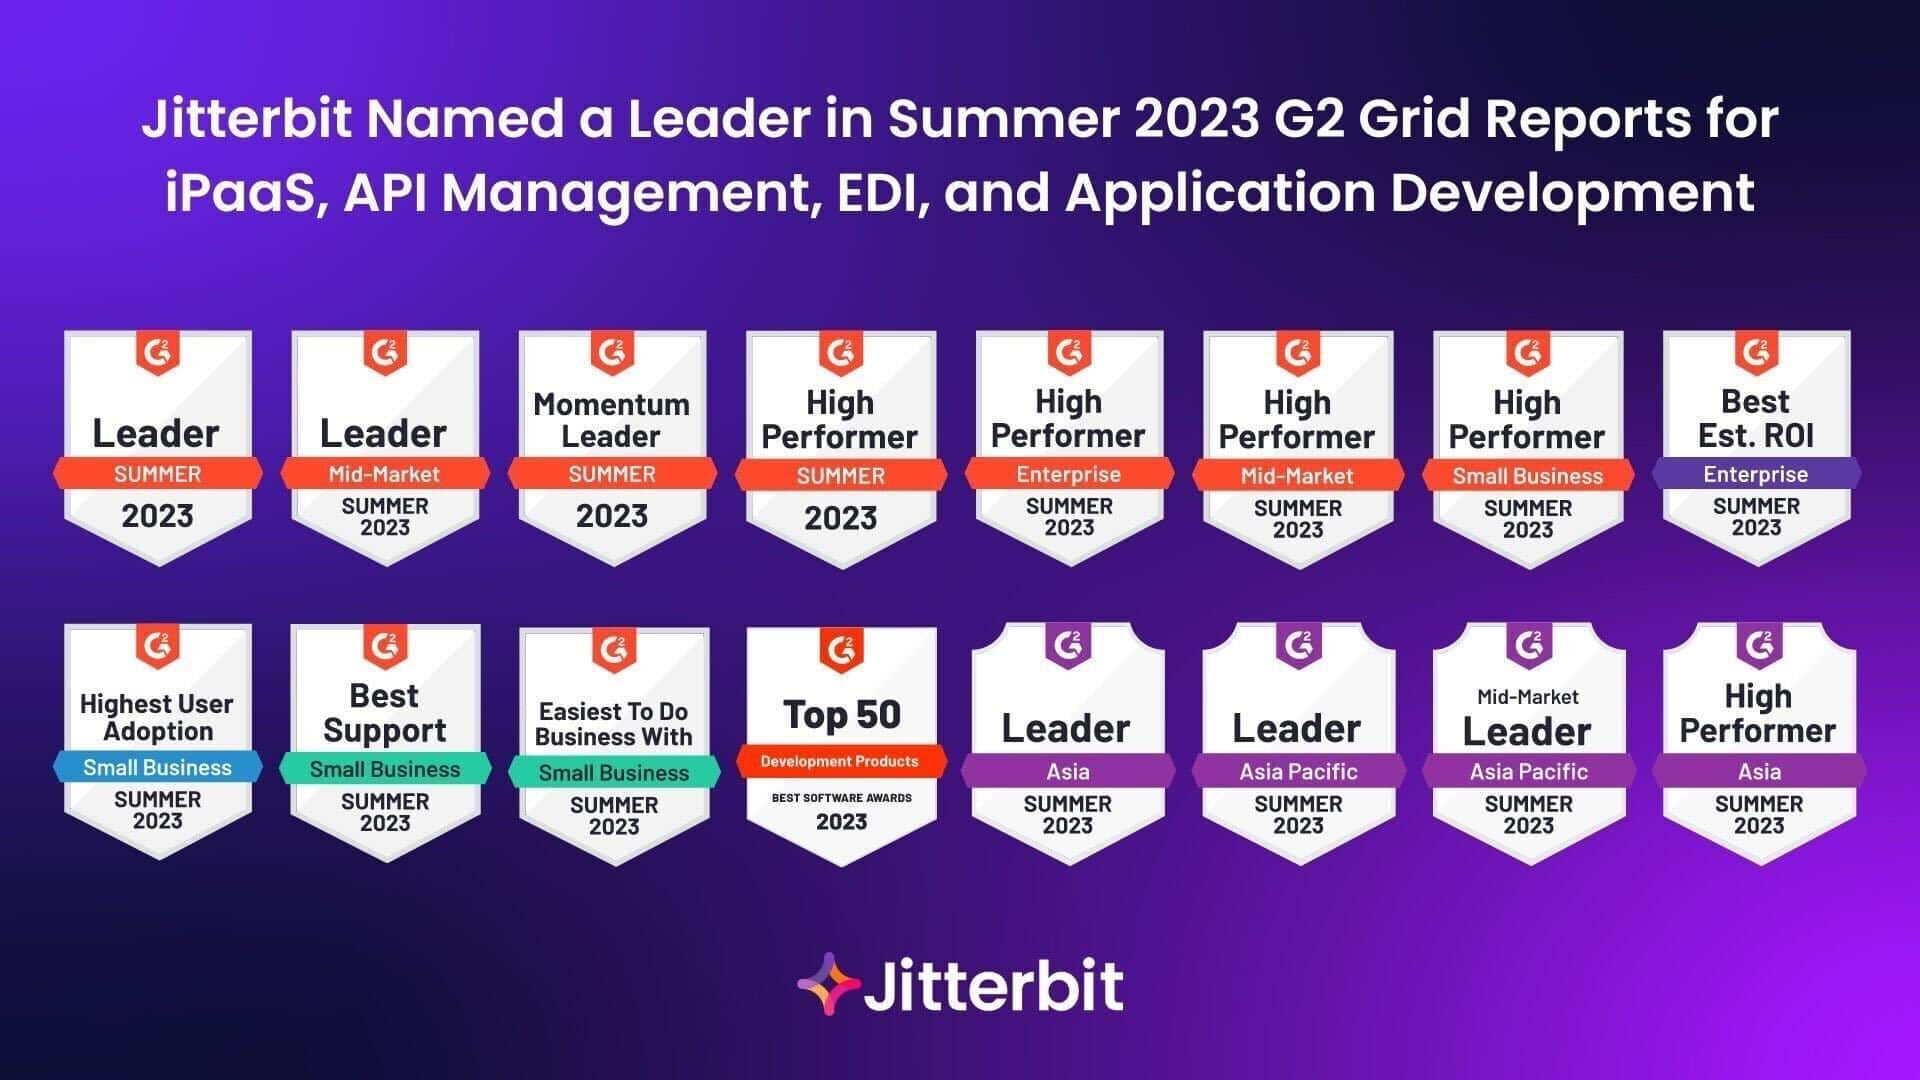 Jitterbit Named a Leader in Summer 2023 G2 Grid Reports for iPaaS, API Management, EDI and Application Development